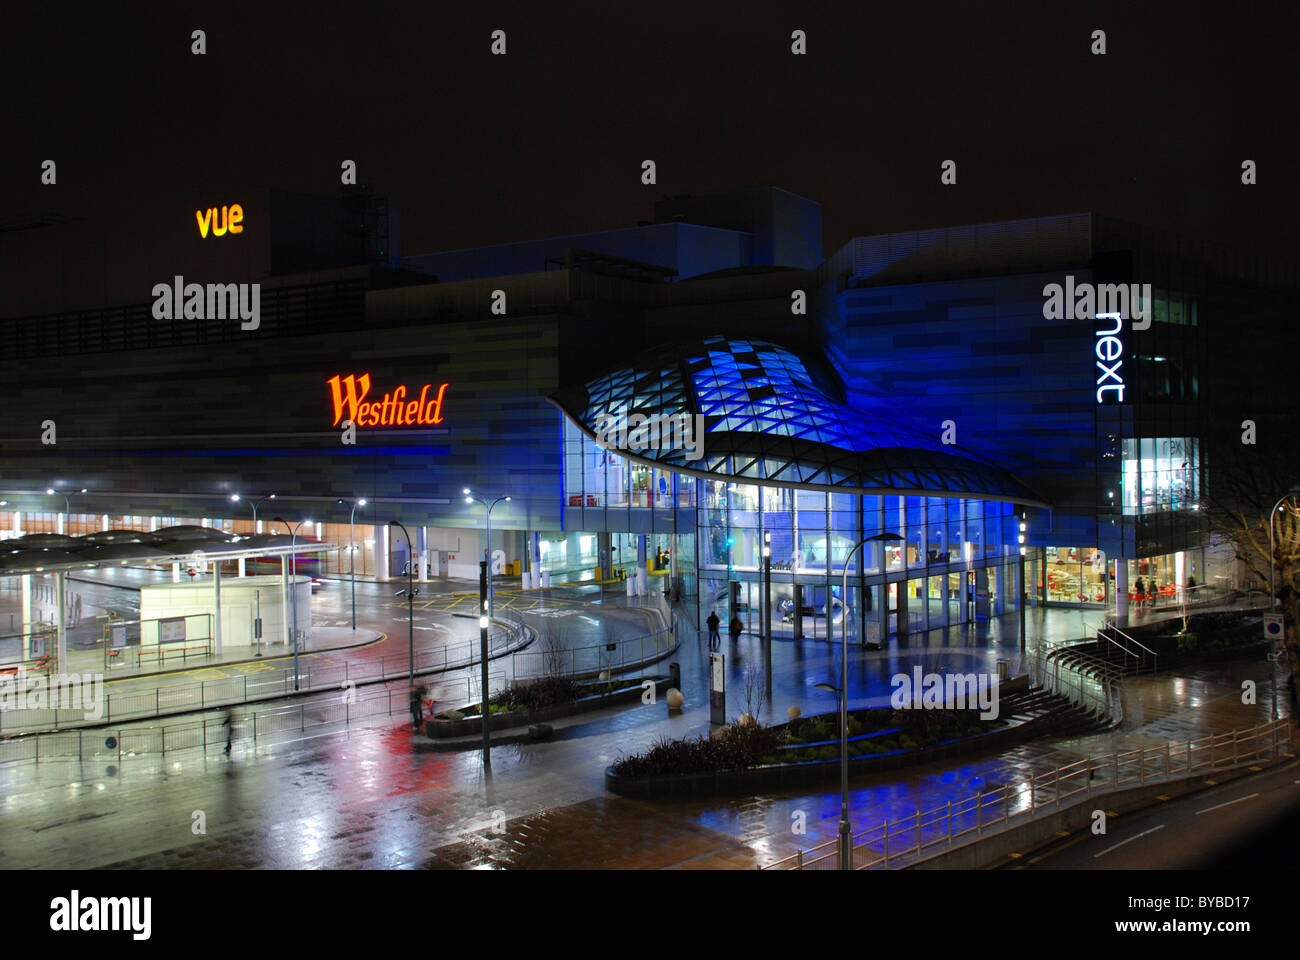 Westfield Shopping Centre Stock Photo